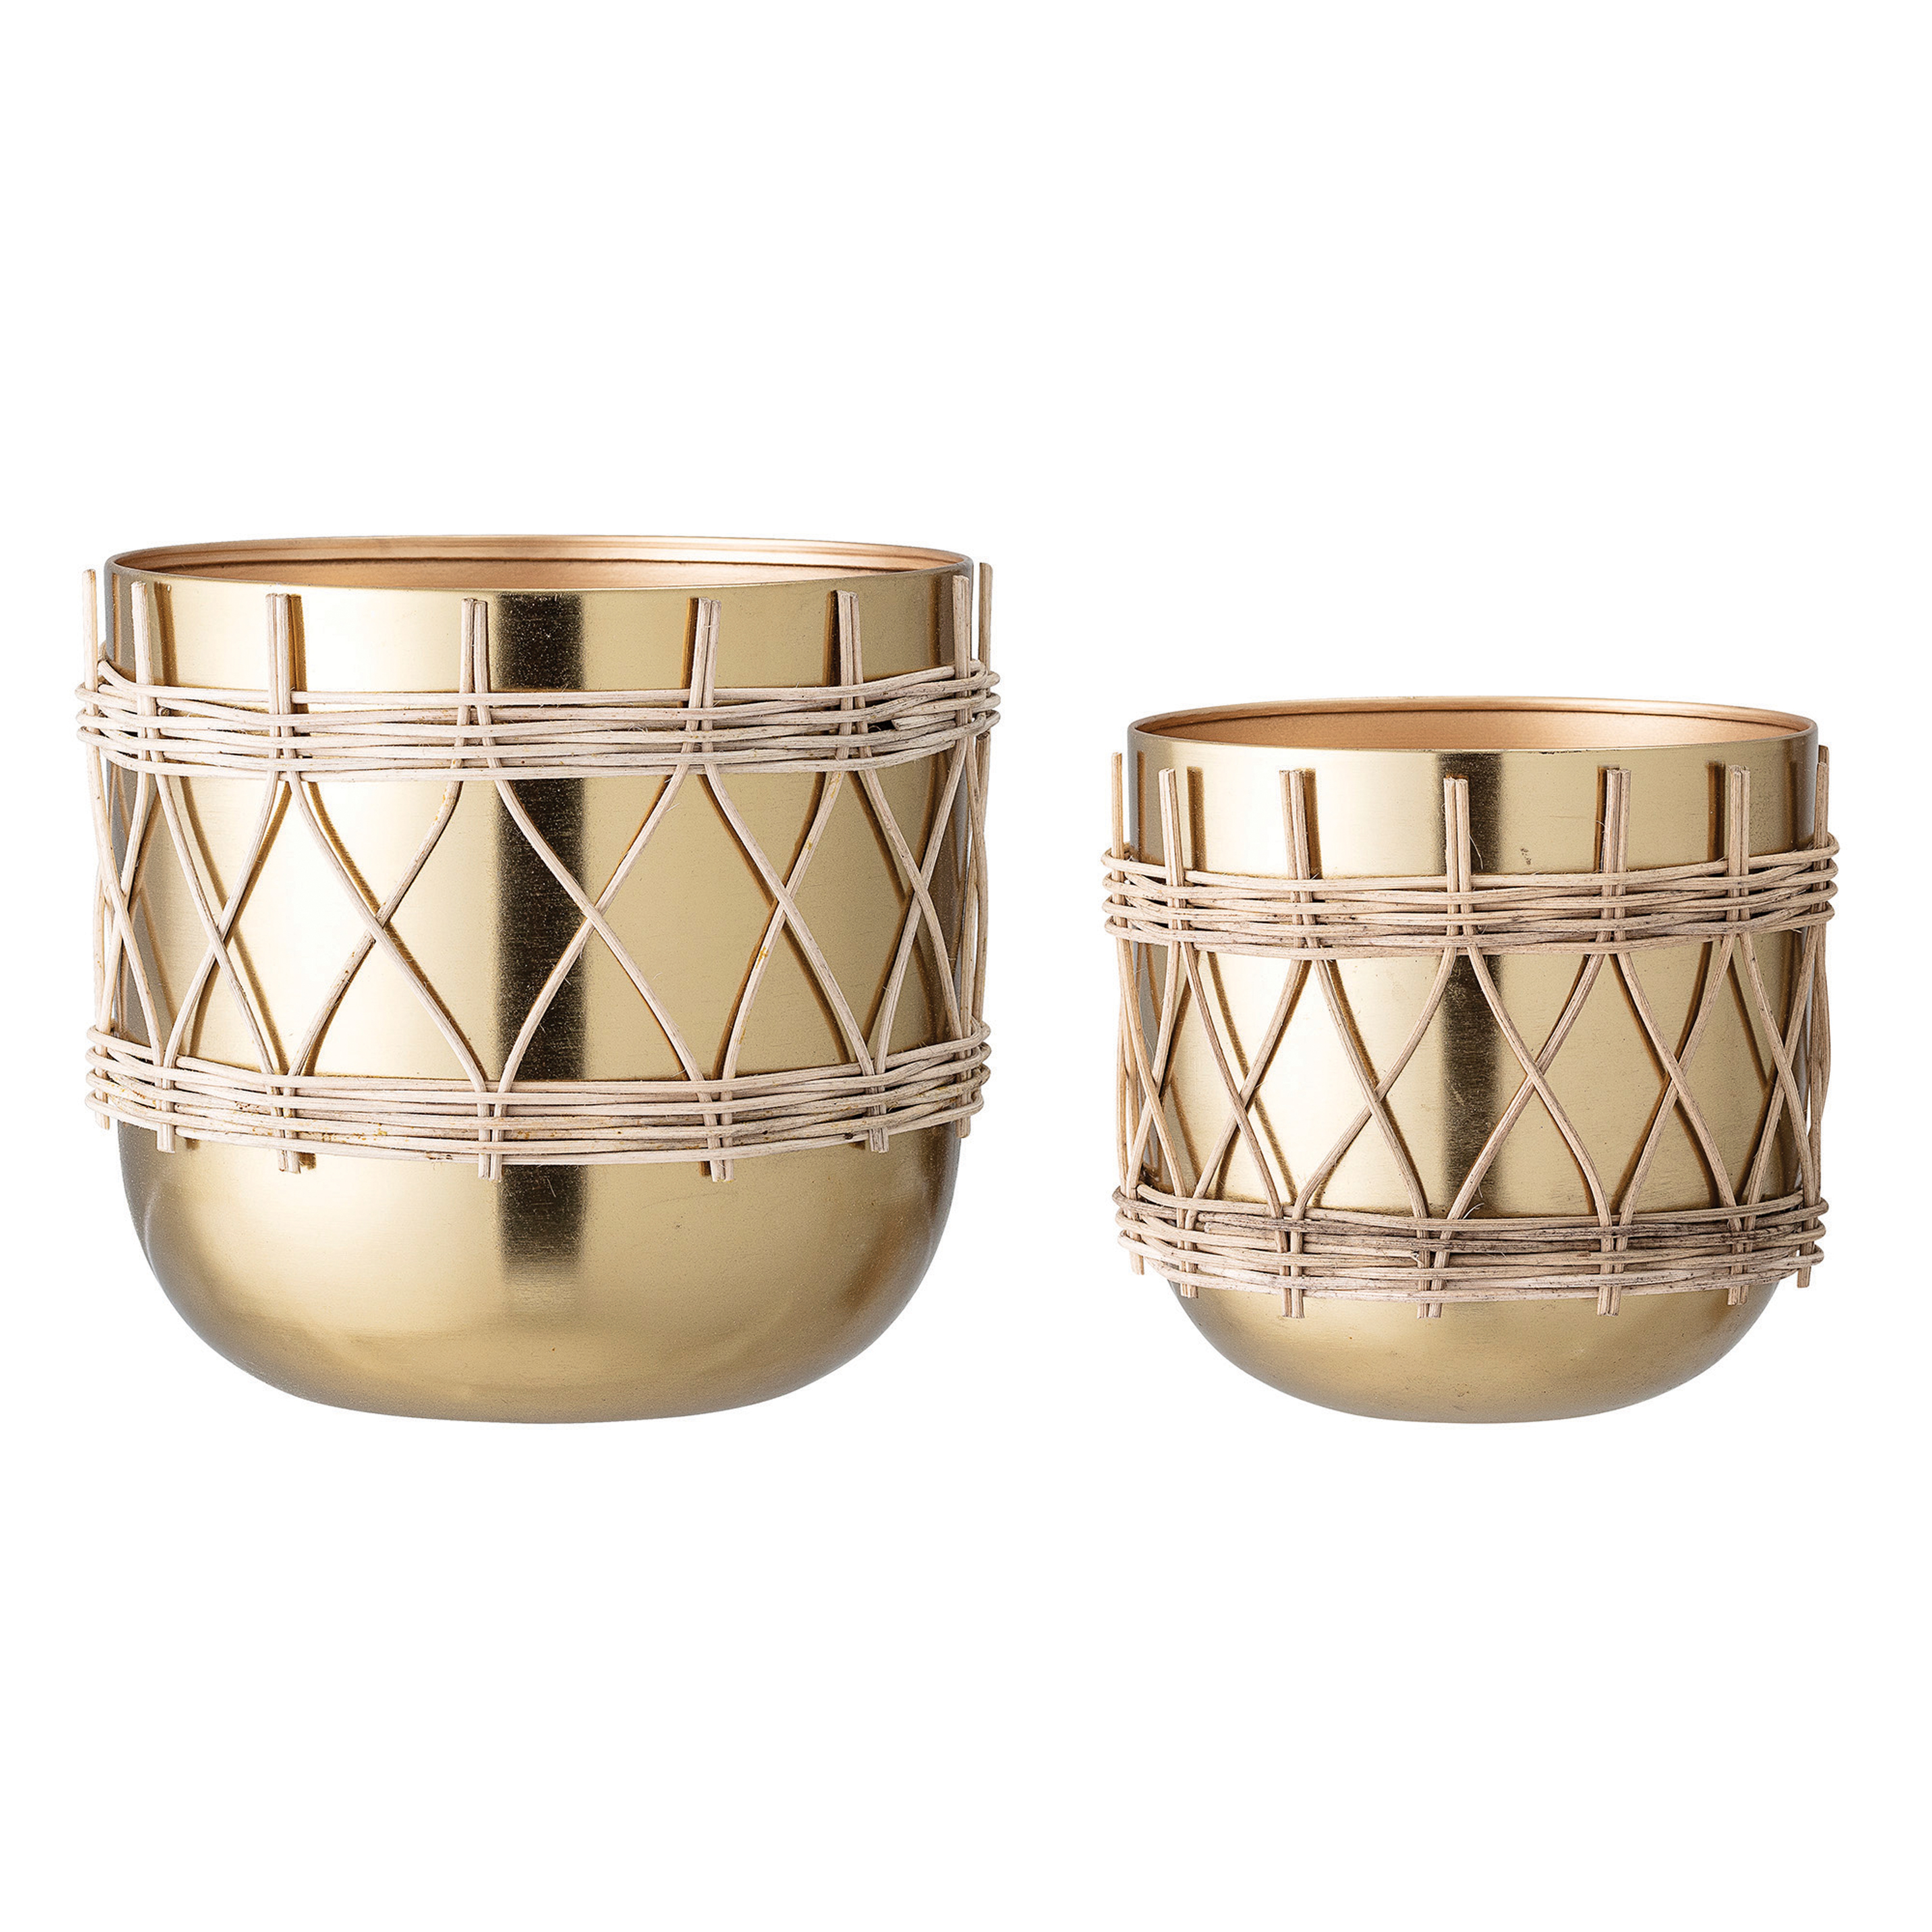 7"H & 9"H Gold Electroplated Metal Planters with Woven Rattan Sleeve (Set of 2 Sizes/Hold 7" & 9" pots) - Moss & Wilder